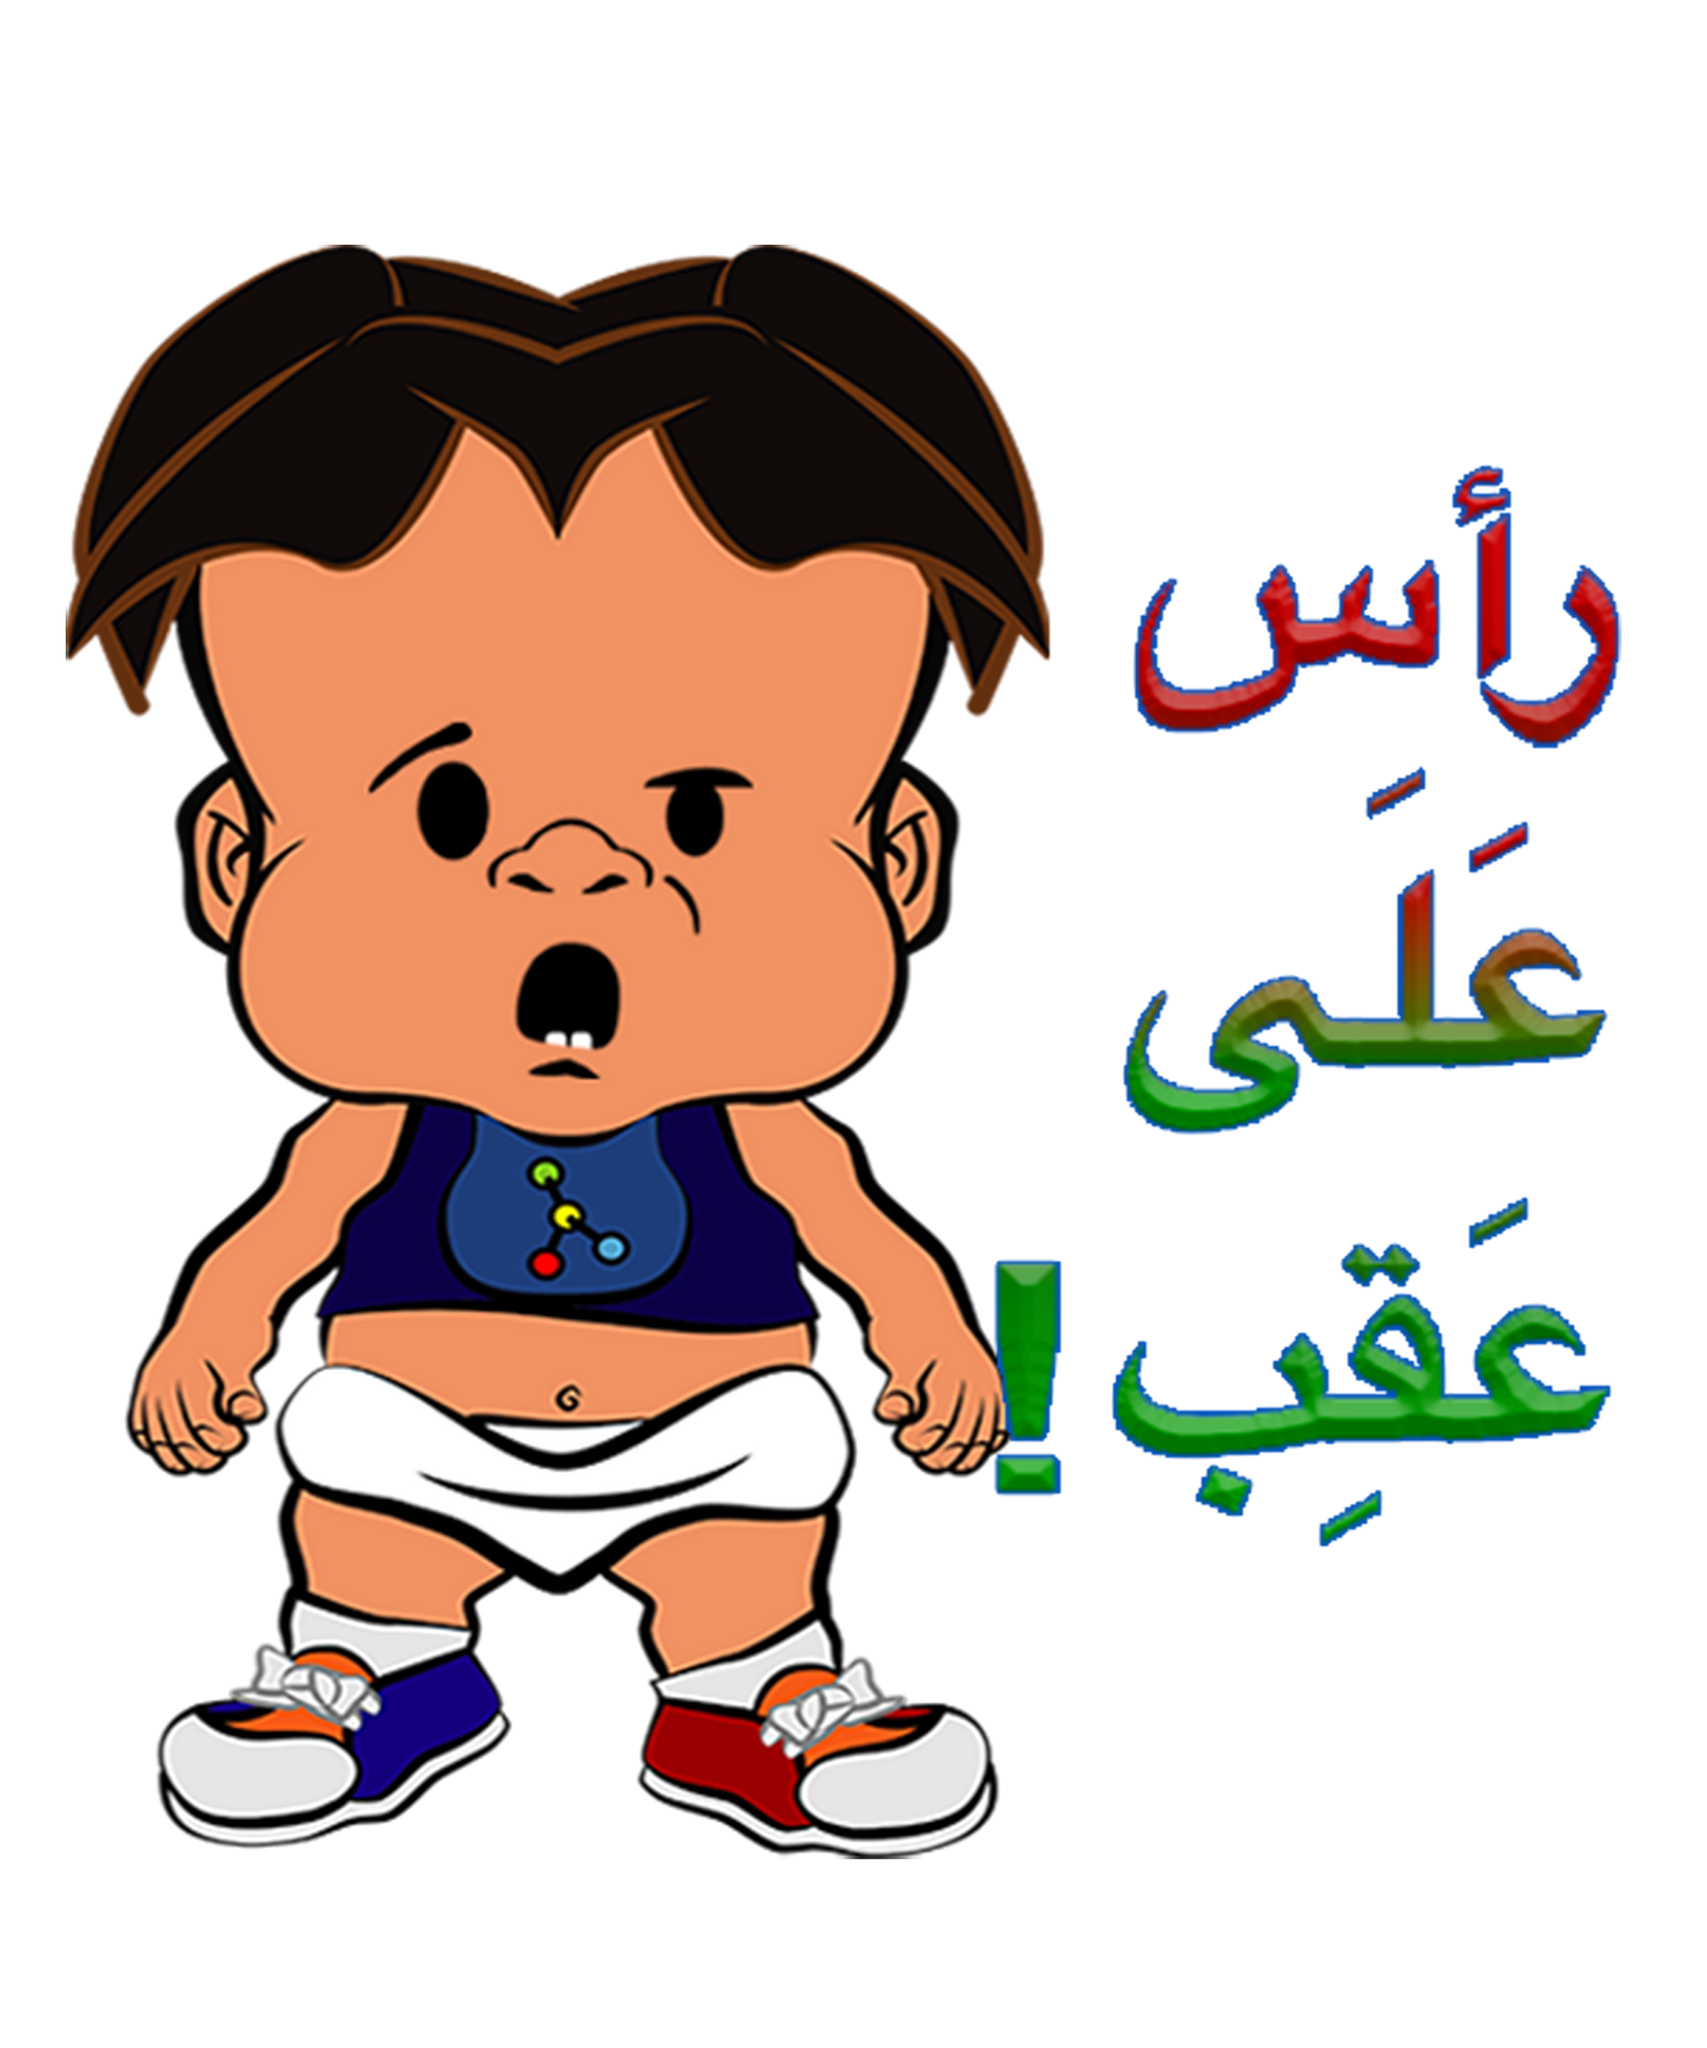 PBCZ1196_He has become the opposite!_boy_2_Arabic